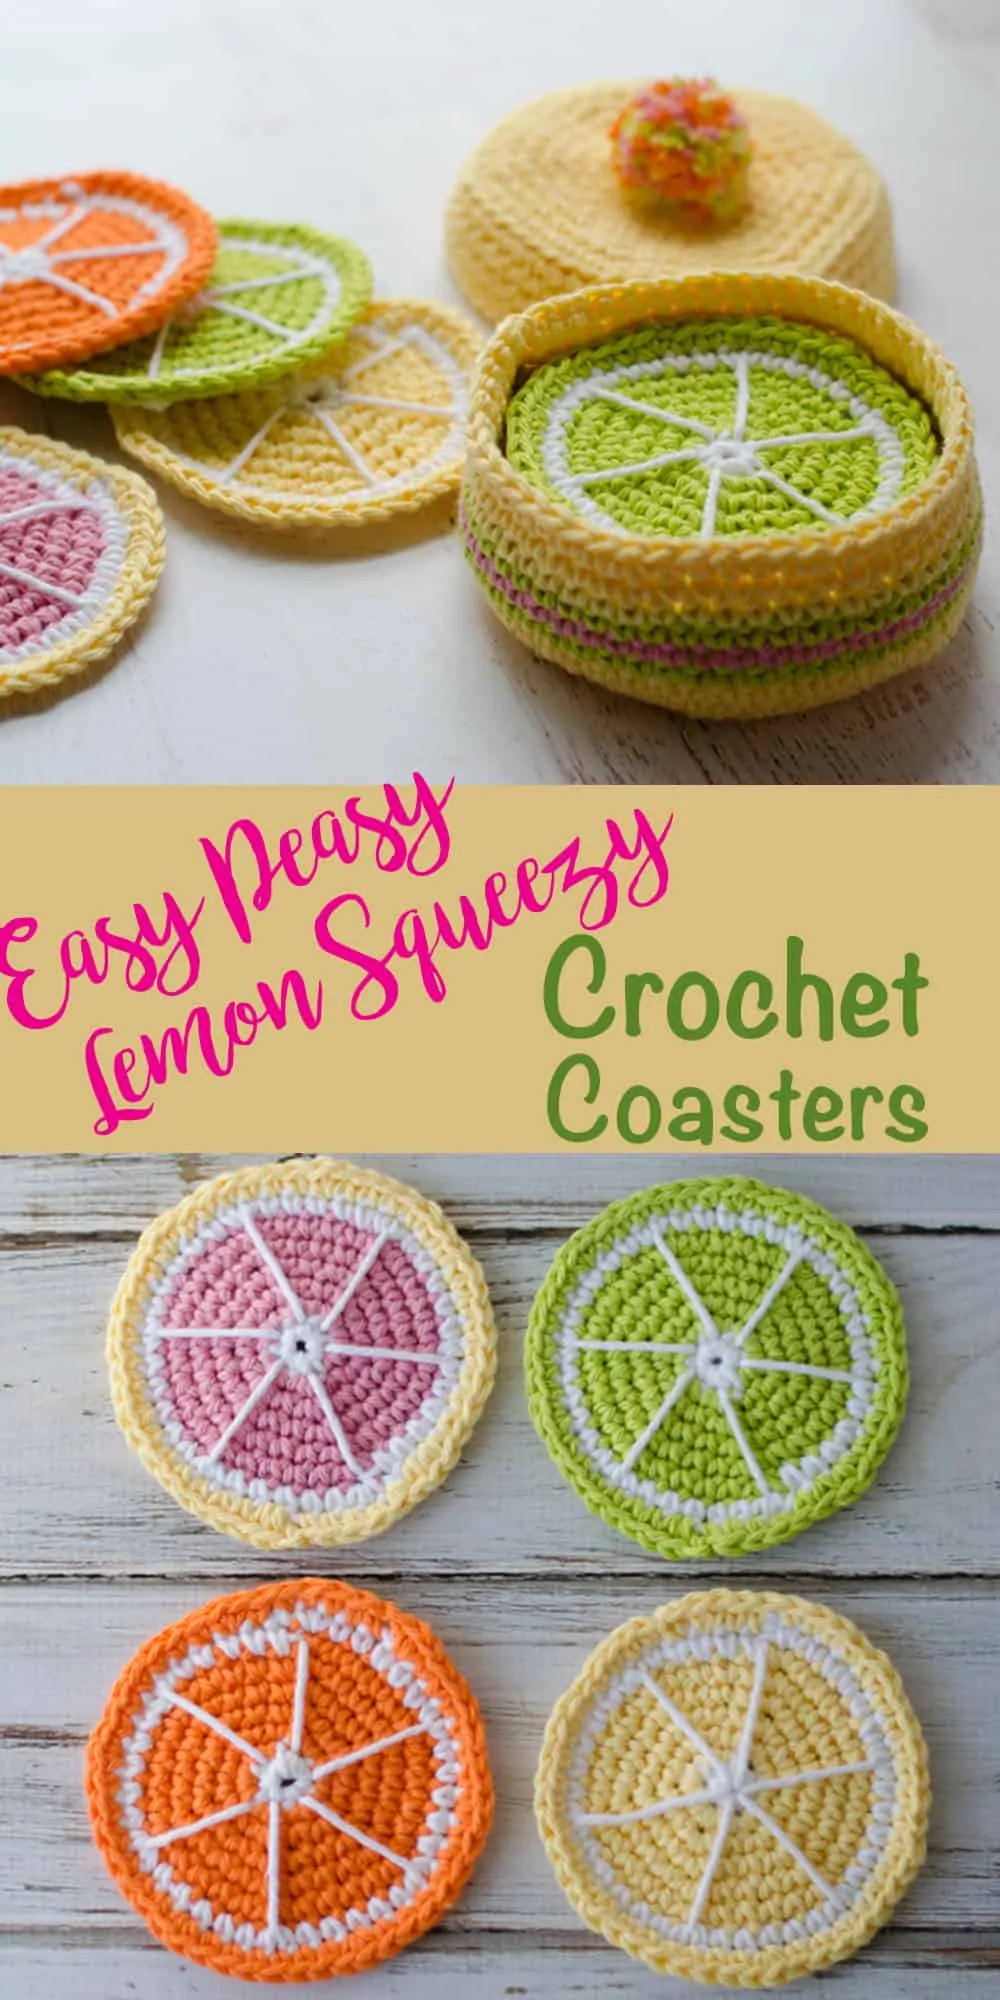 Graphic of various crochet citrus coasters and box